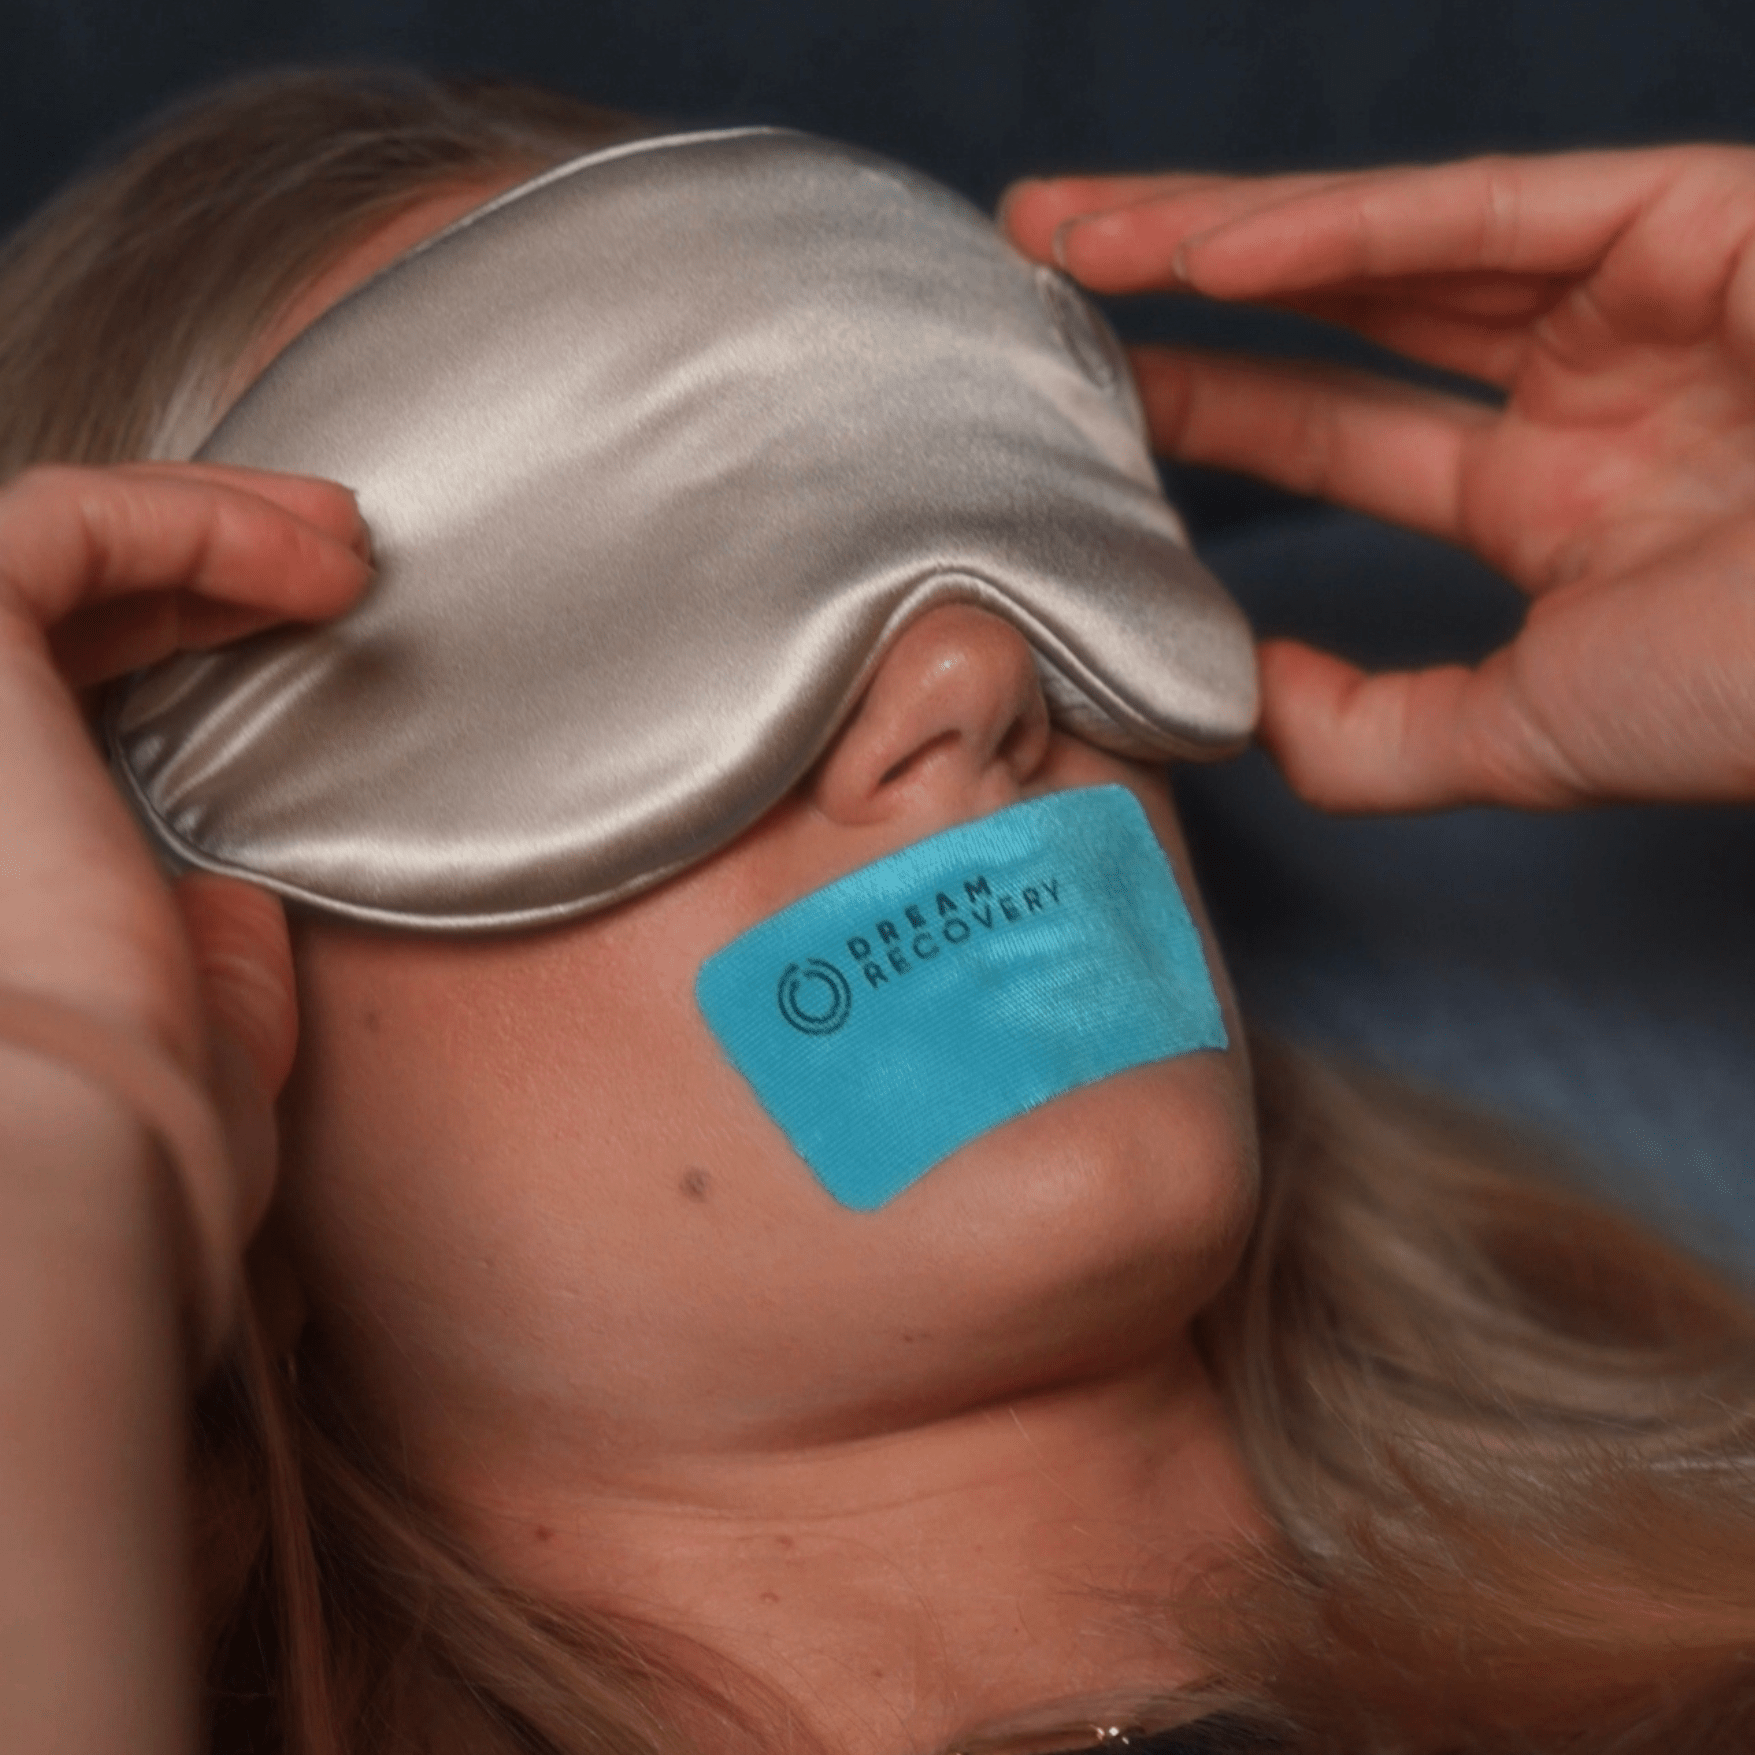 Dream Tape, Best Mouth Tape for Sleeping and Breathing Benefits